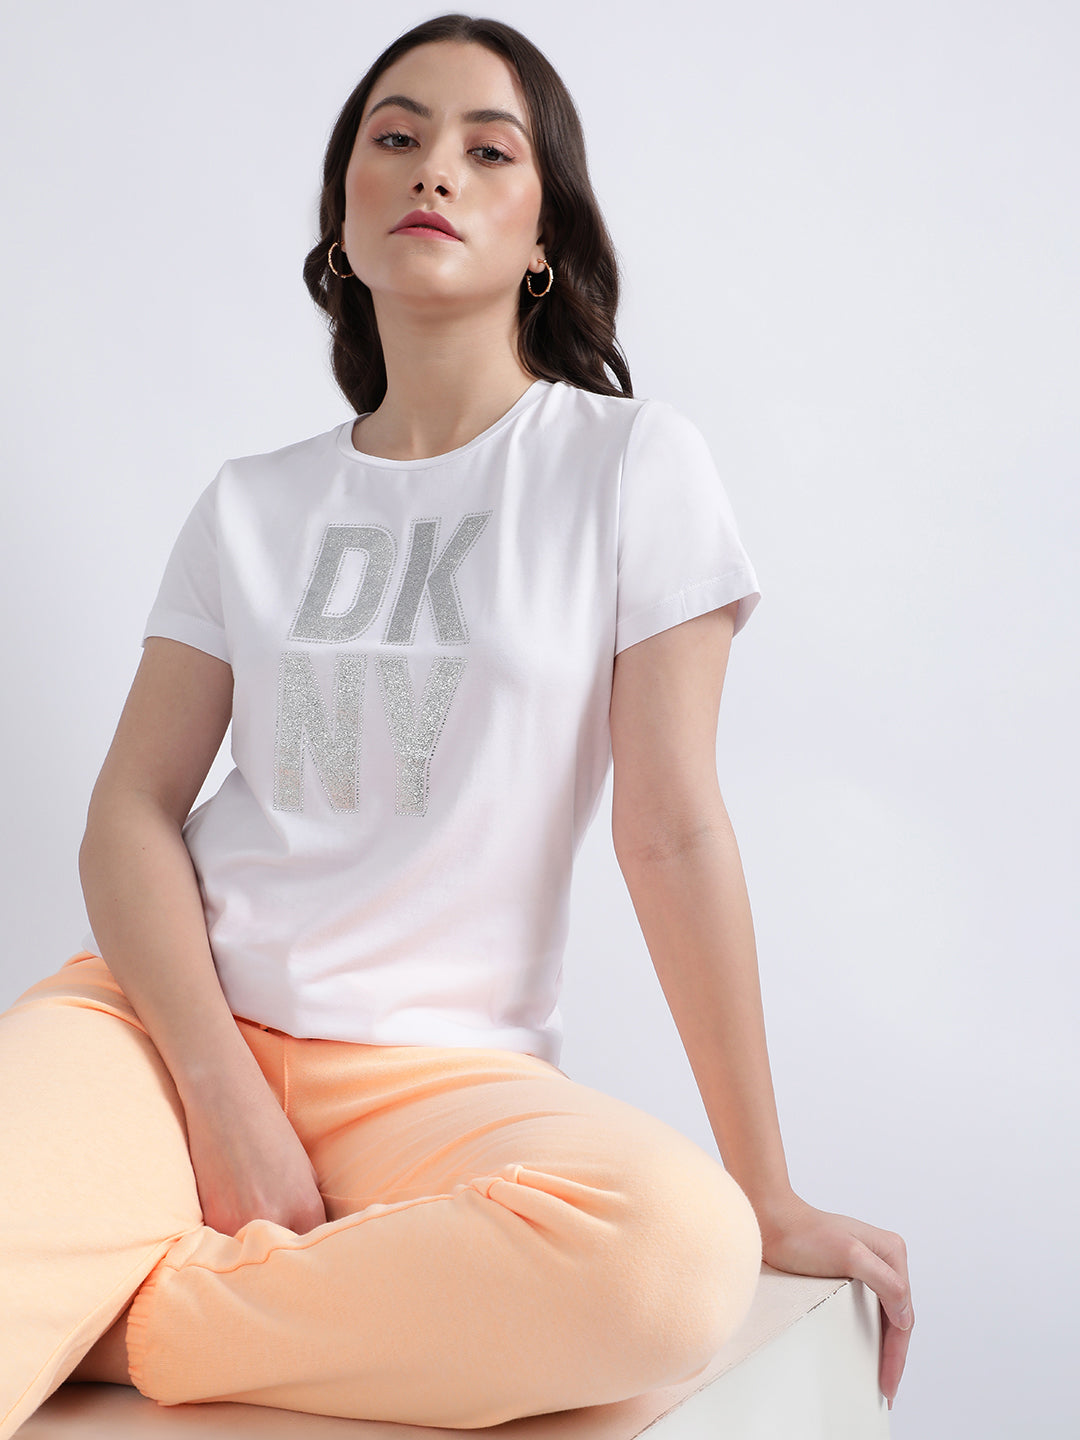 Dkny Online Store in India